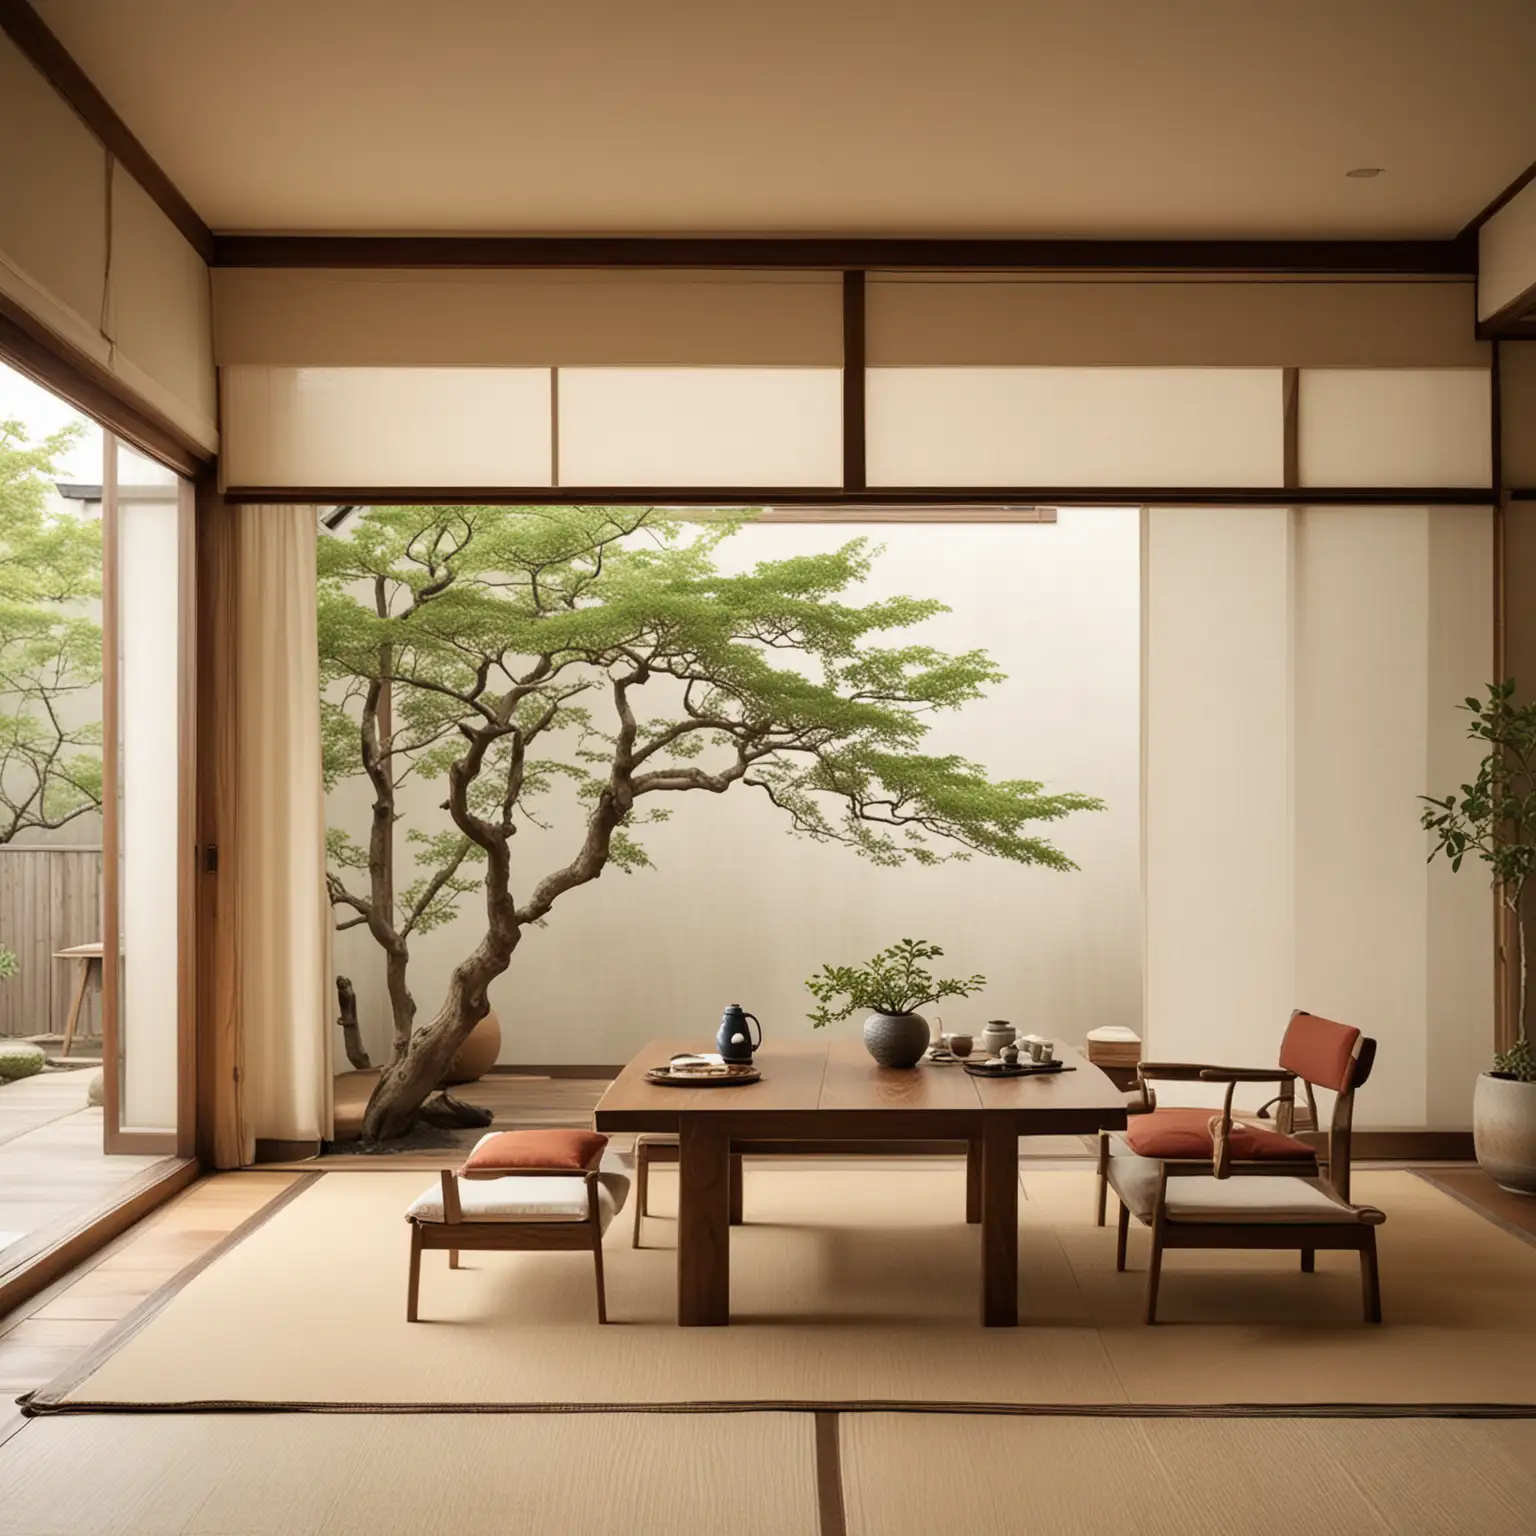 design a very wide distant shot of Minimalist Japanese-Inspired Dining Area:nLow wooden table with a simple, sleek design.nFloor cushions in neutral tones.nShoji screens for room dividers.nBonsai tree as a centerpiece on the table.nTatami mat flooring and minimal wall decor.nSoft natural light filtering through rice paper windows.